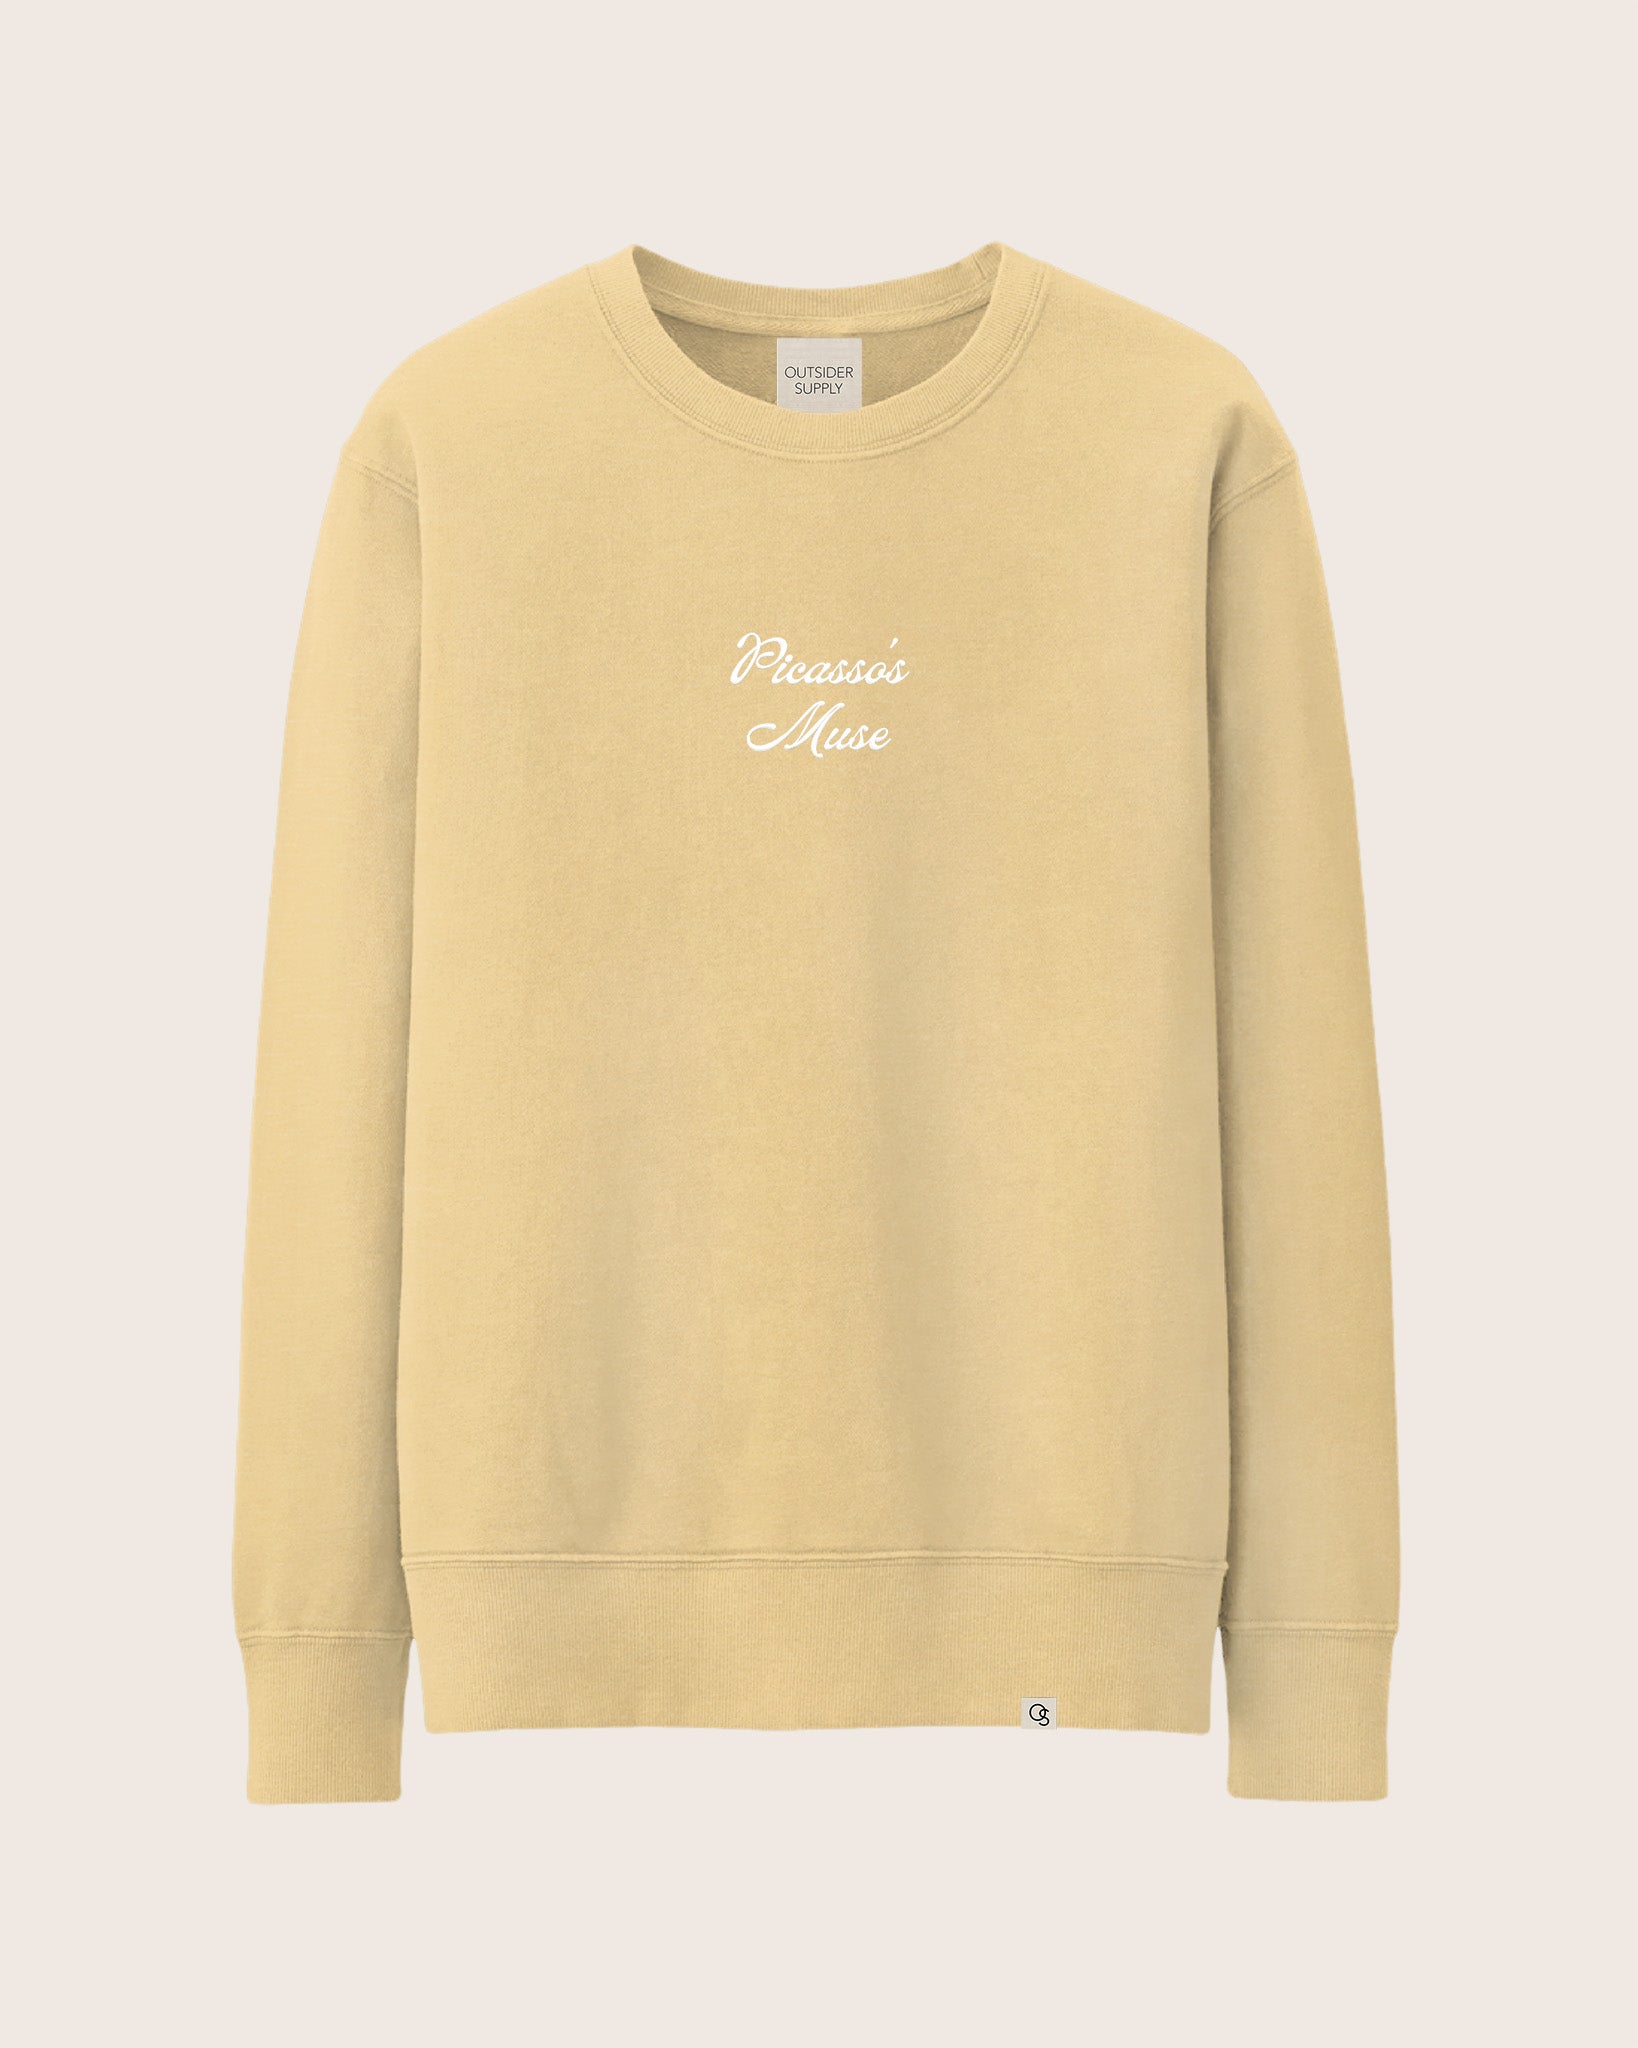 Pastel / Yellow Heavyweight Sweatshirt / Crewneck with embroidered script of Picasso’s Muse. 